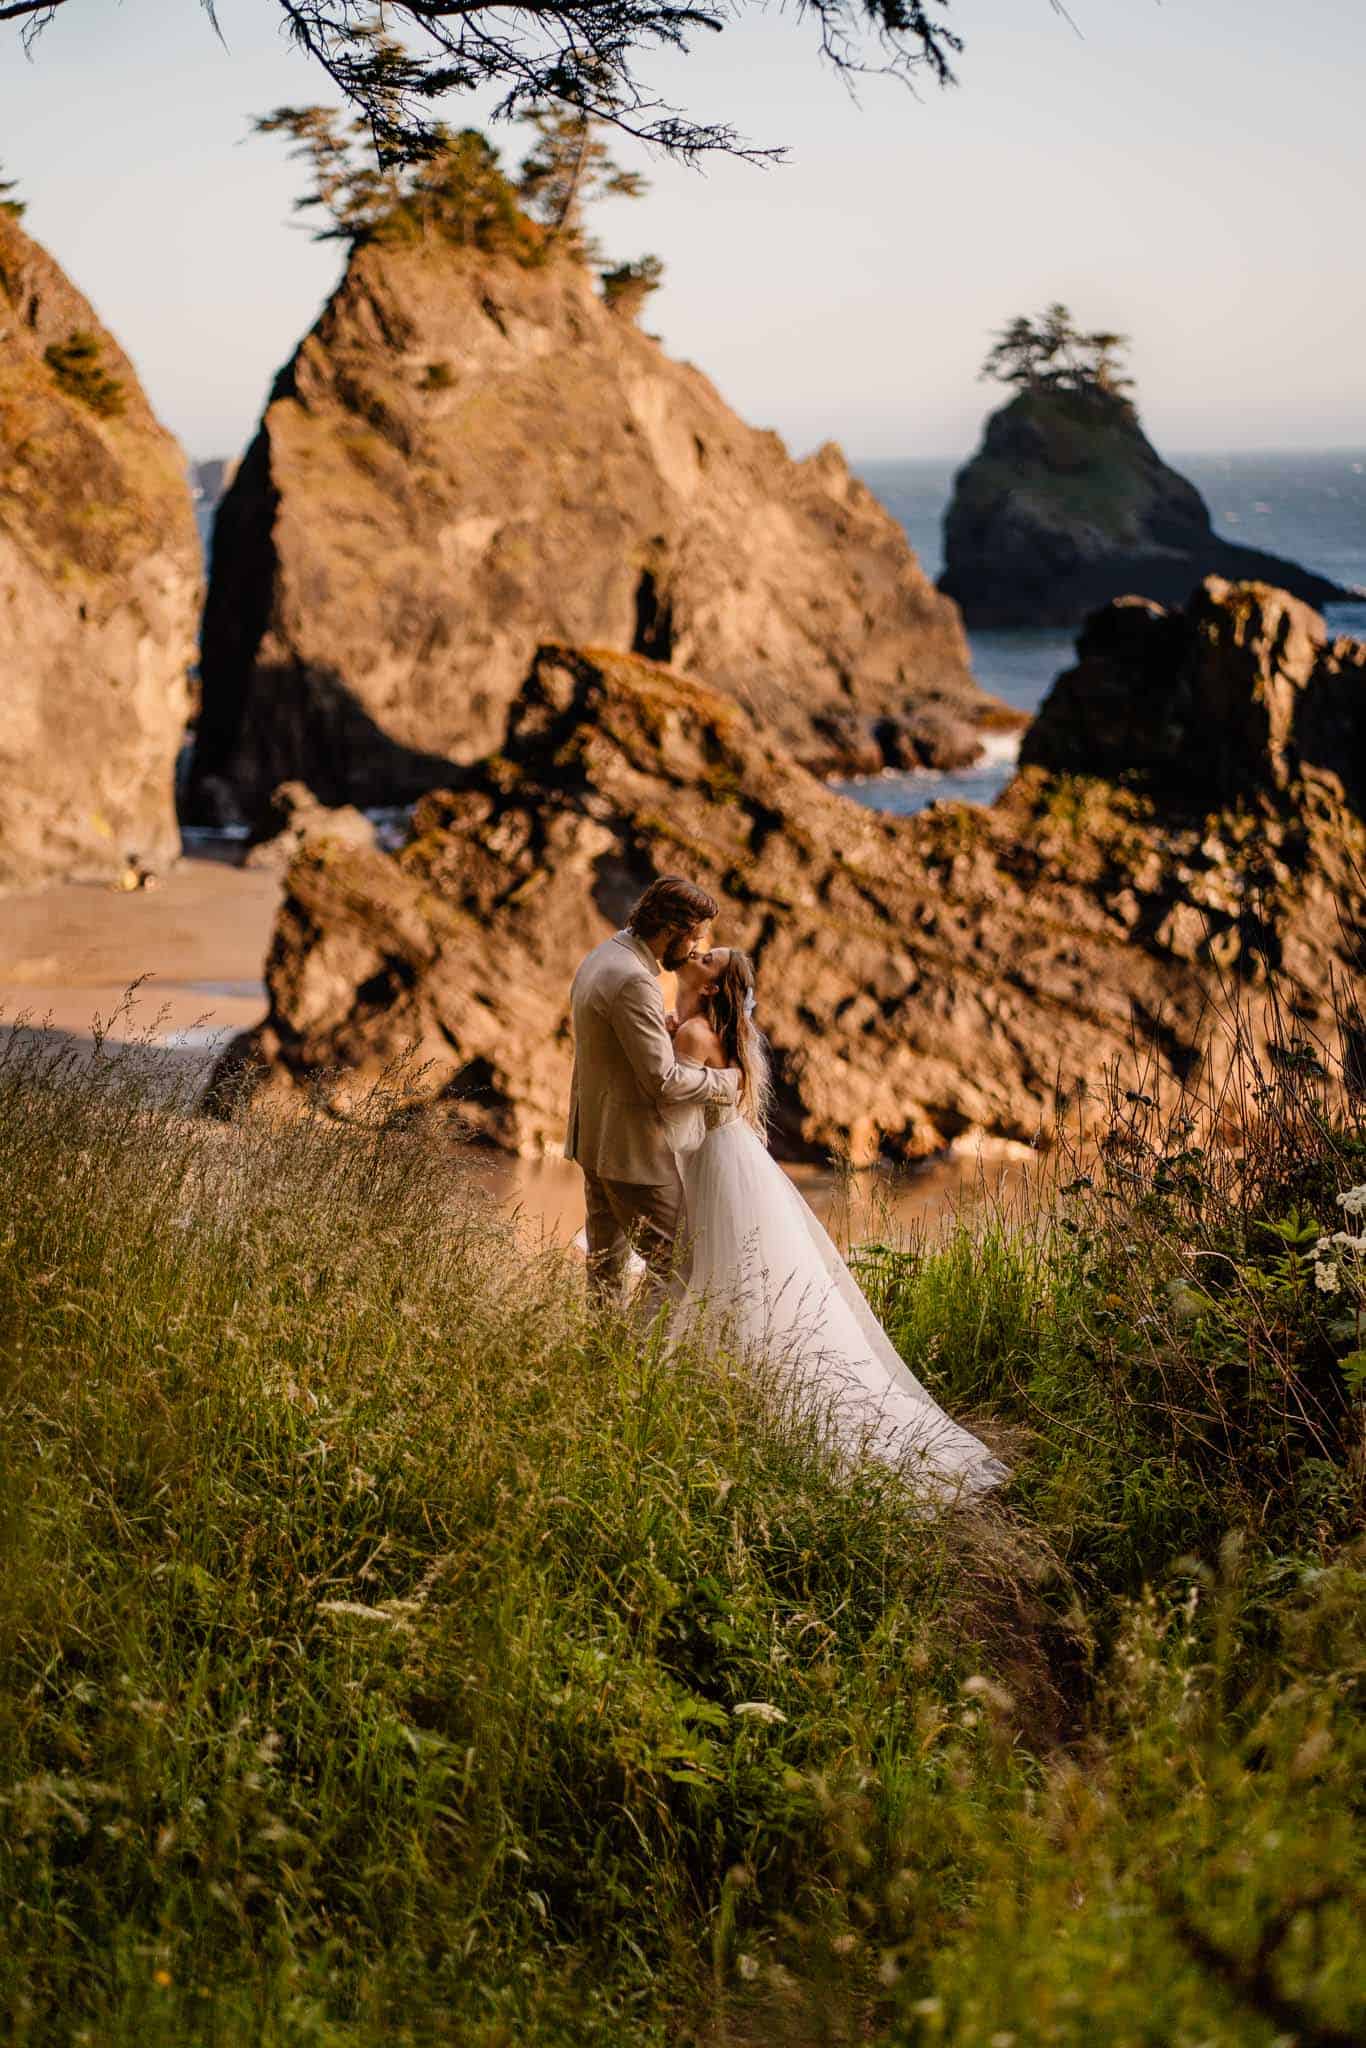 eloping couple standing on cliff edge with sea rocks behind them making this the ultimate Oregon elopement location